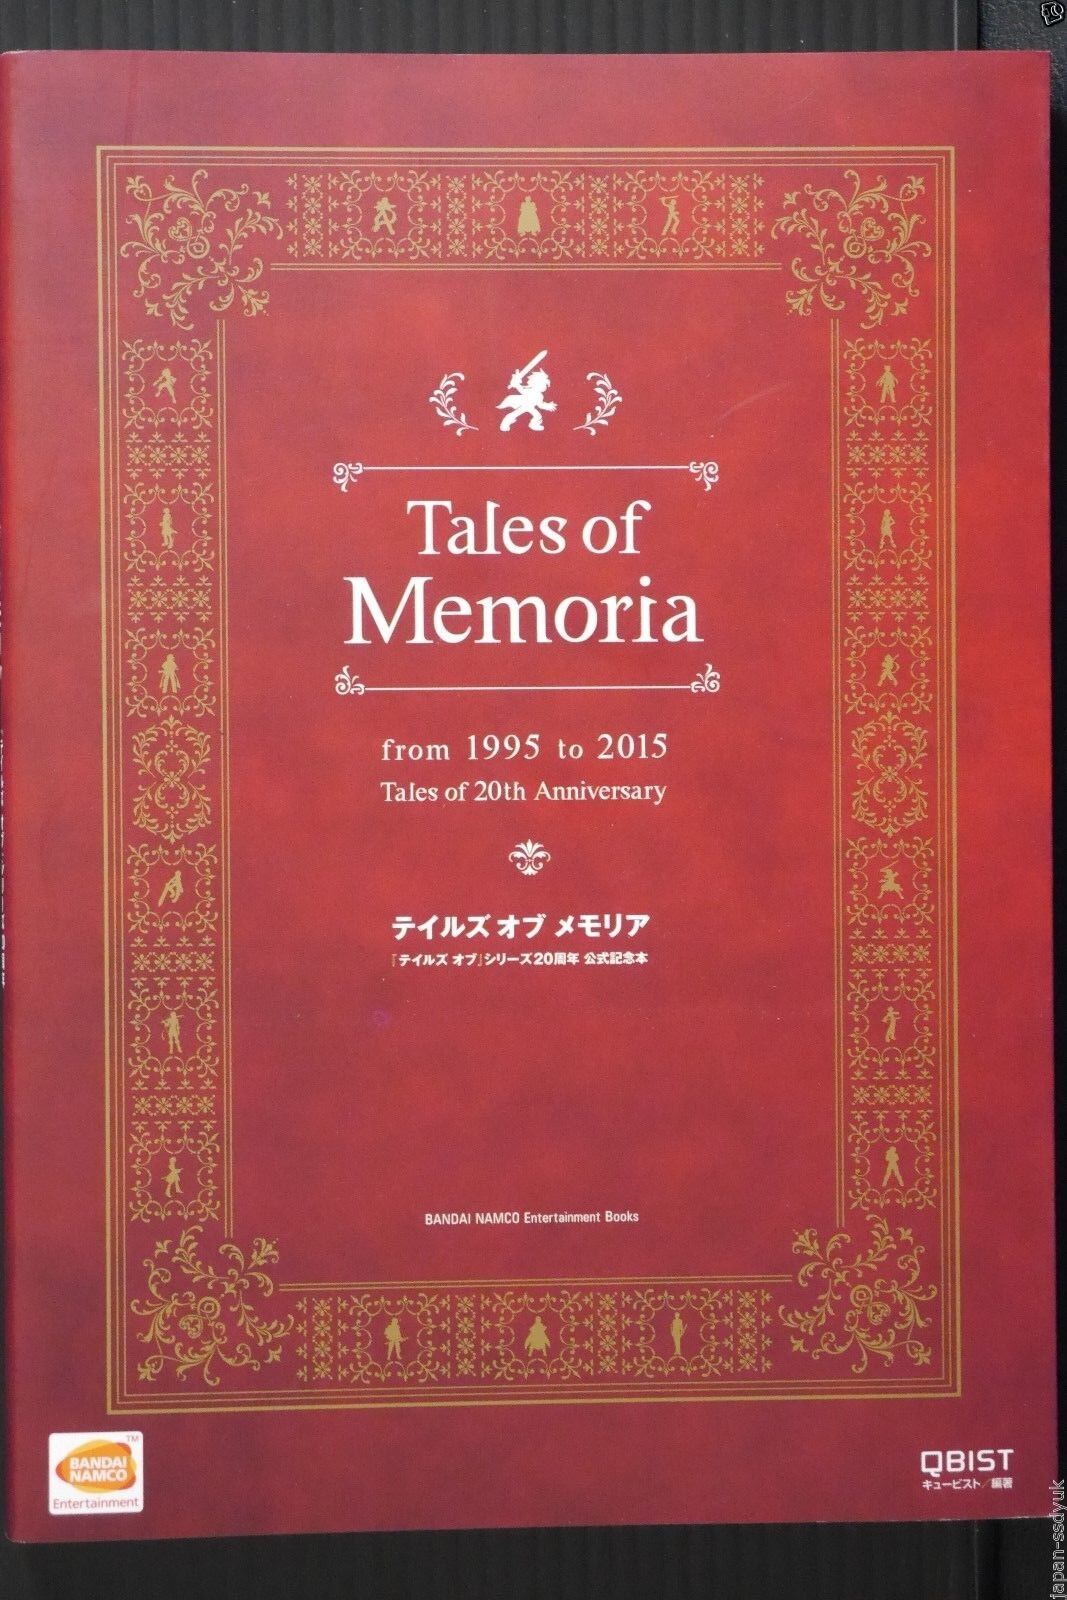 Tales of 20th Anniversary Book: From 1995 to 2015 'Tales of Memoria' from Japan